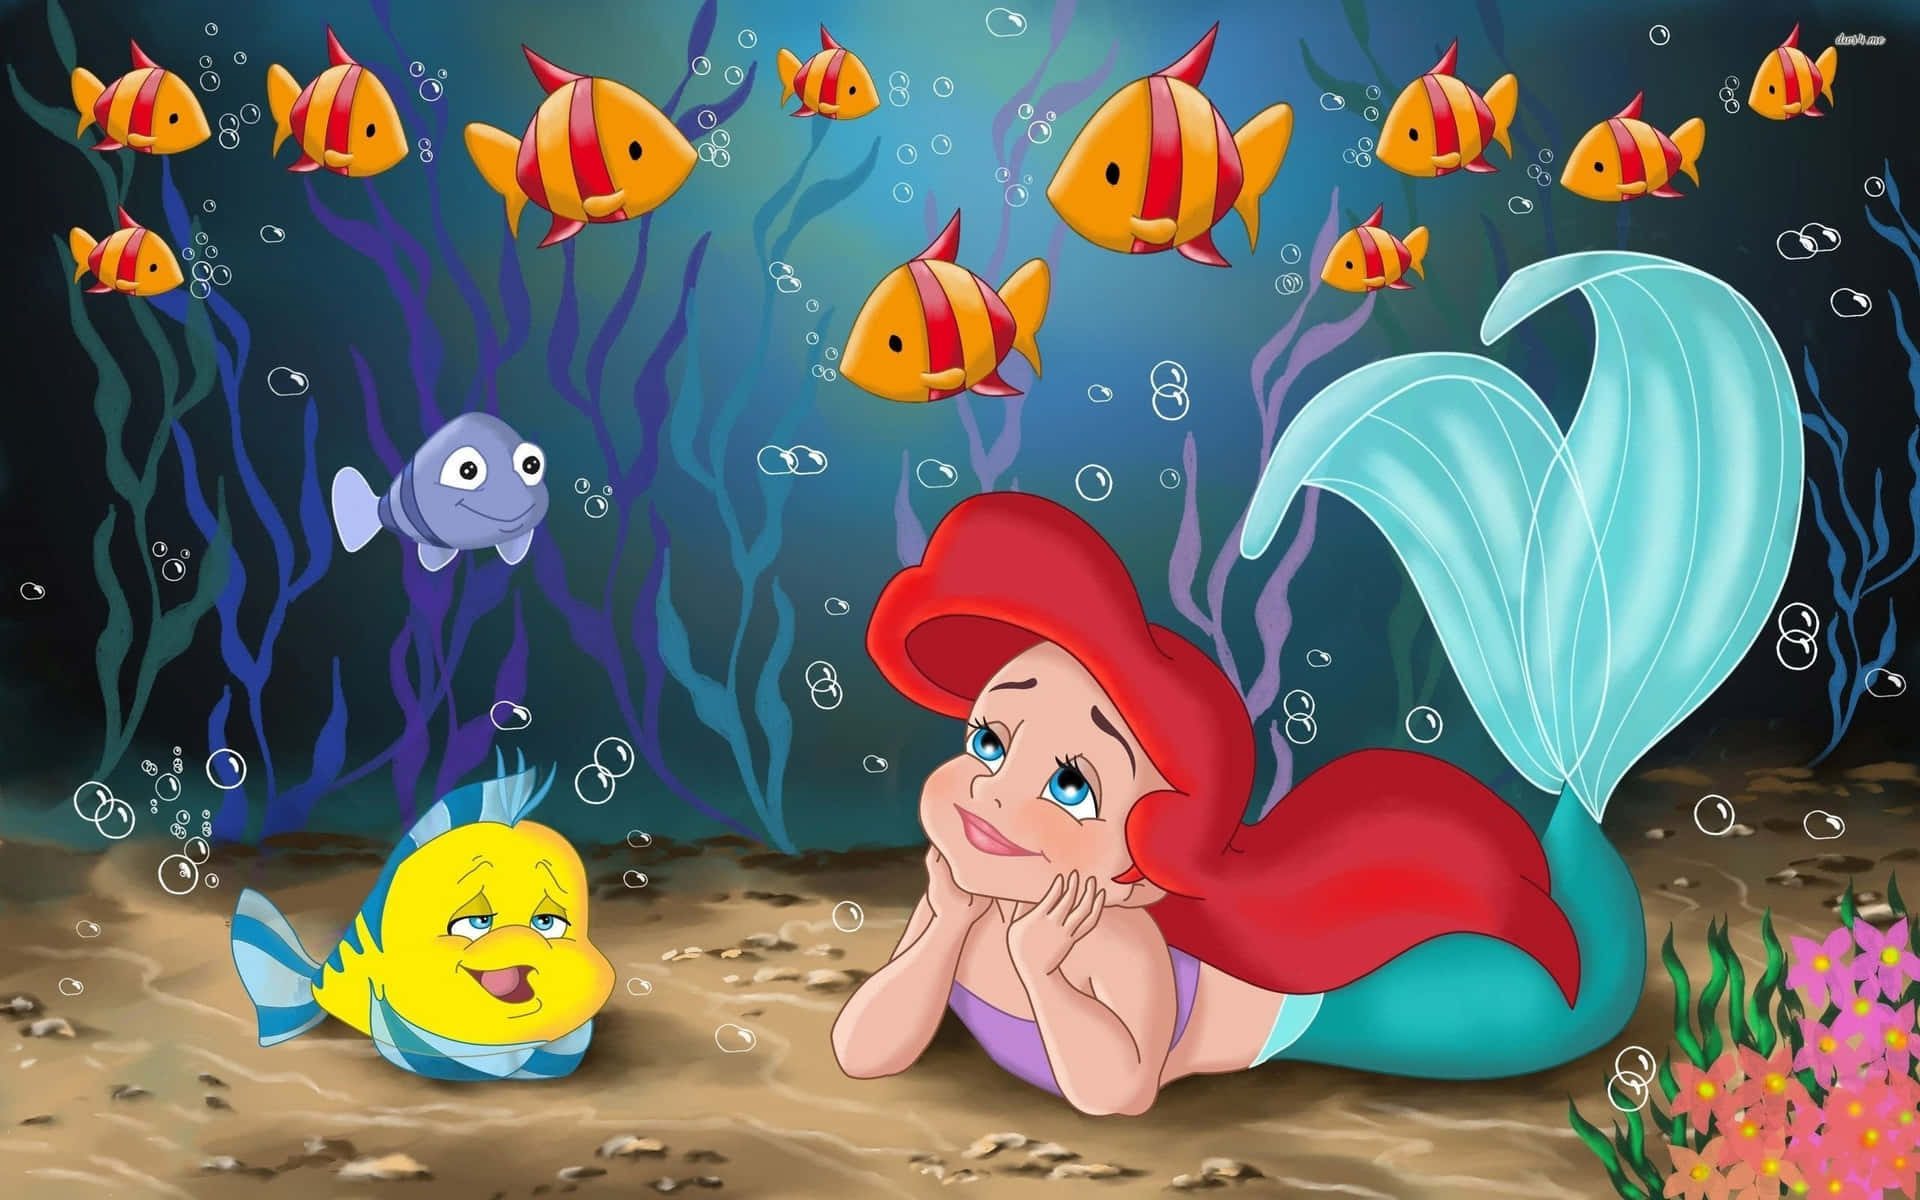 Live your dreams in the underwater world of Ariel's enchanted kingdom